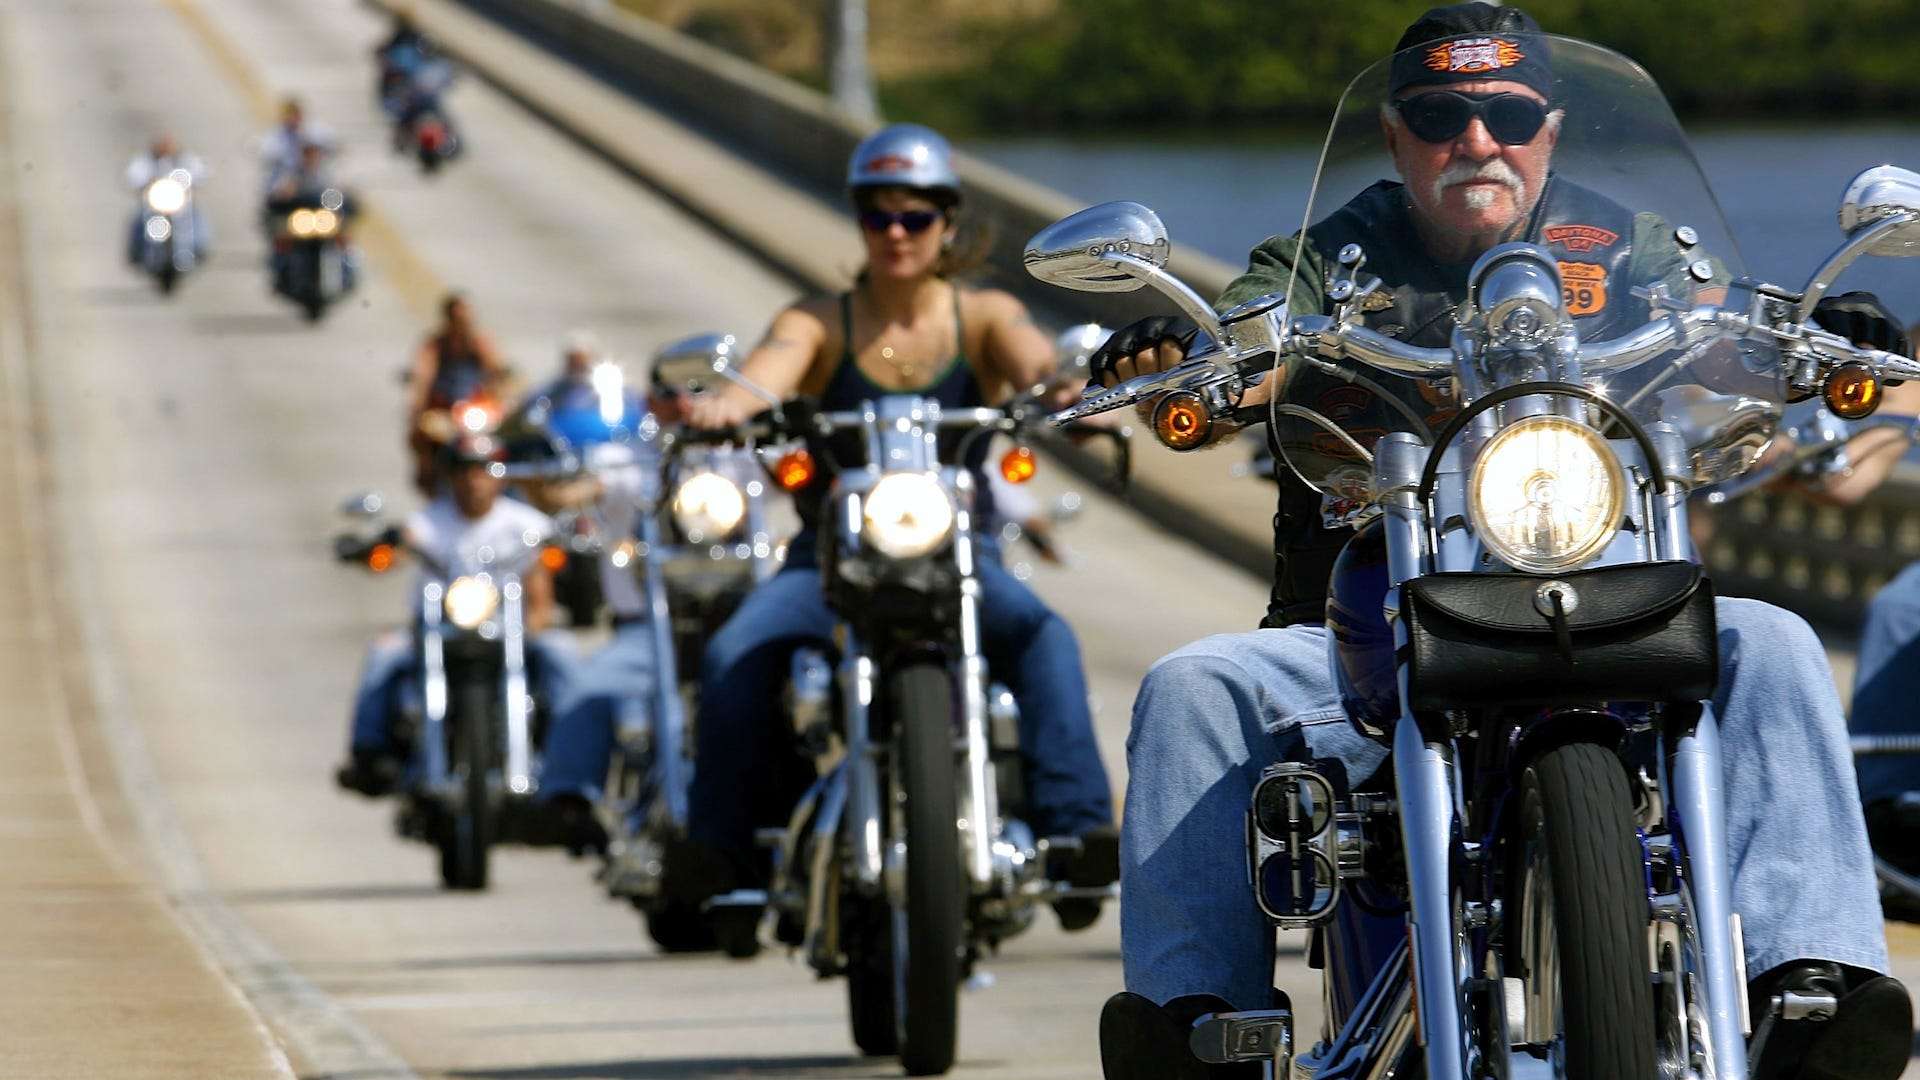 Harley Davidson Restarts Production But The Company Is Reportedly Shipping 70 Fewer Bikes To Dealers In 2020 ?imgsize=231665